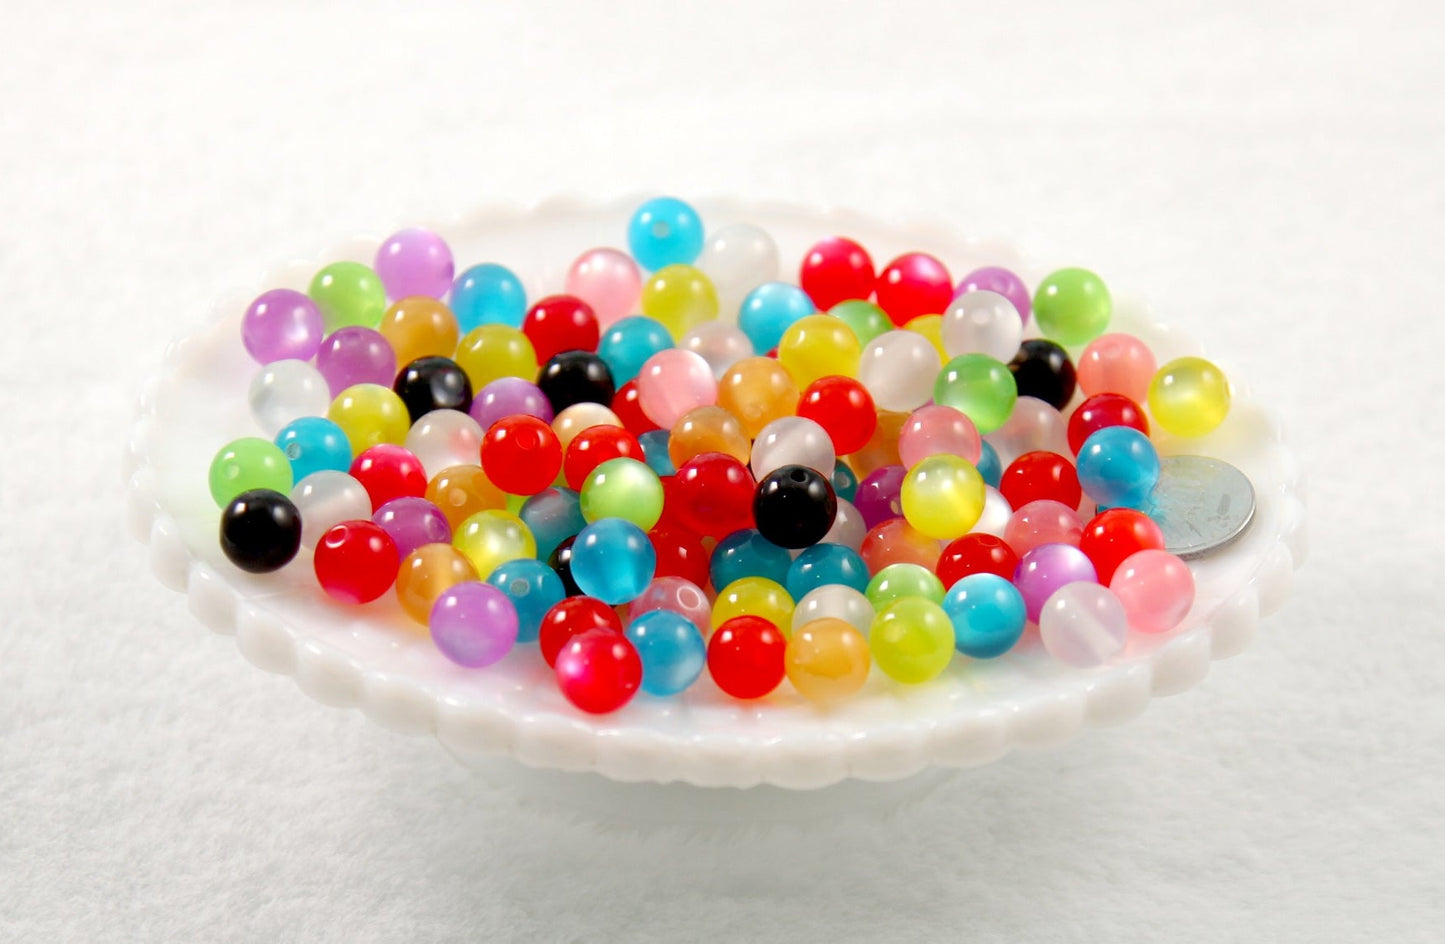 Cats Eye Beads - 10mm Colorful Moonglow Pearly Acrylic or Resin Beads - 100 pc set